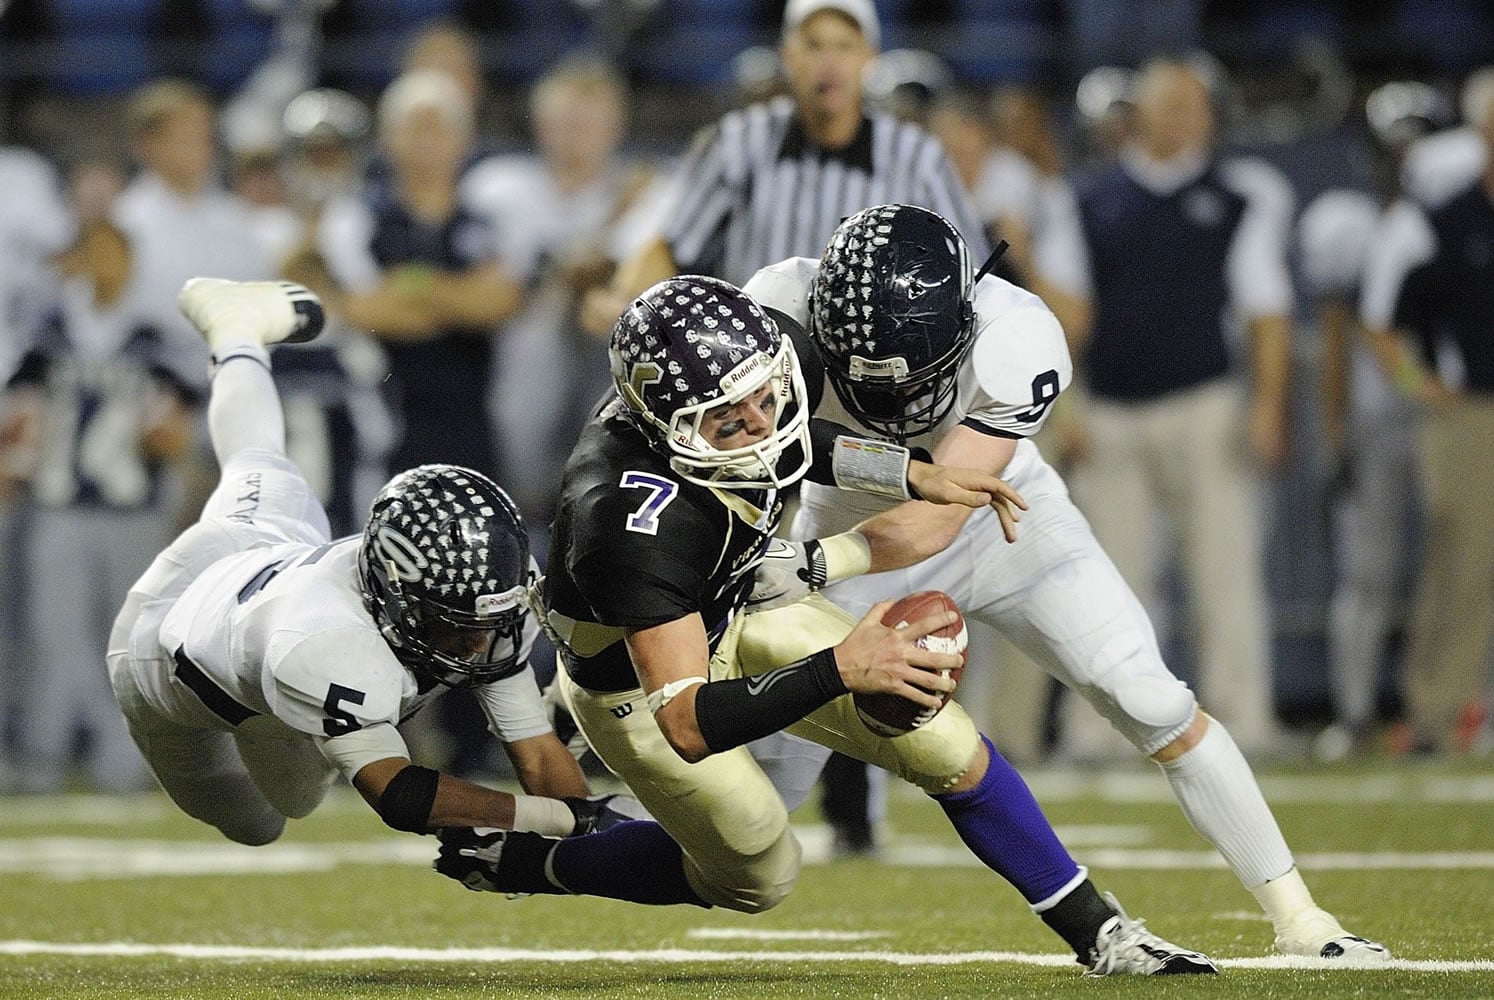 Skyview defenders Xavier Norman (5) and Hayden Shuh (9) sack Lake Stevens quarterback Jake Nelson during Saturday's Class 4A state semifinal at the Tacoma Dome.